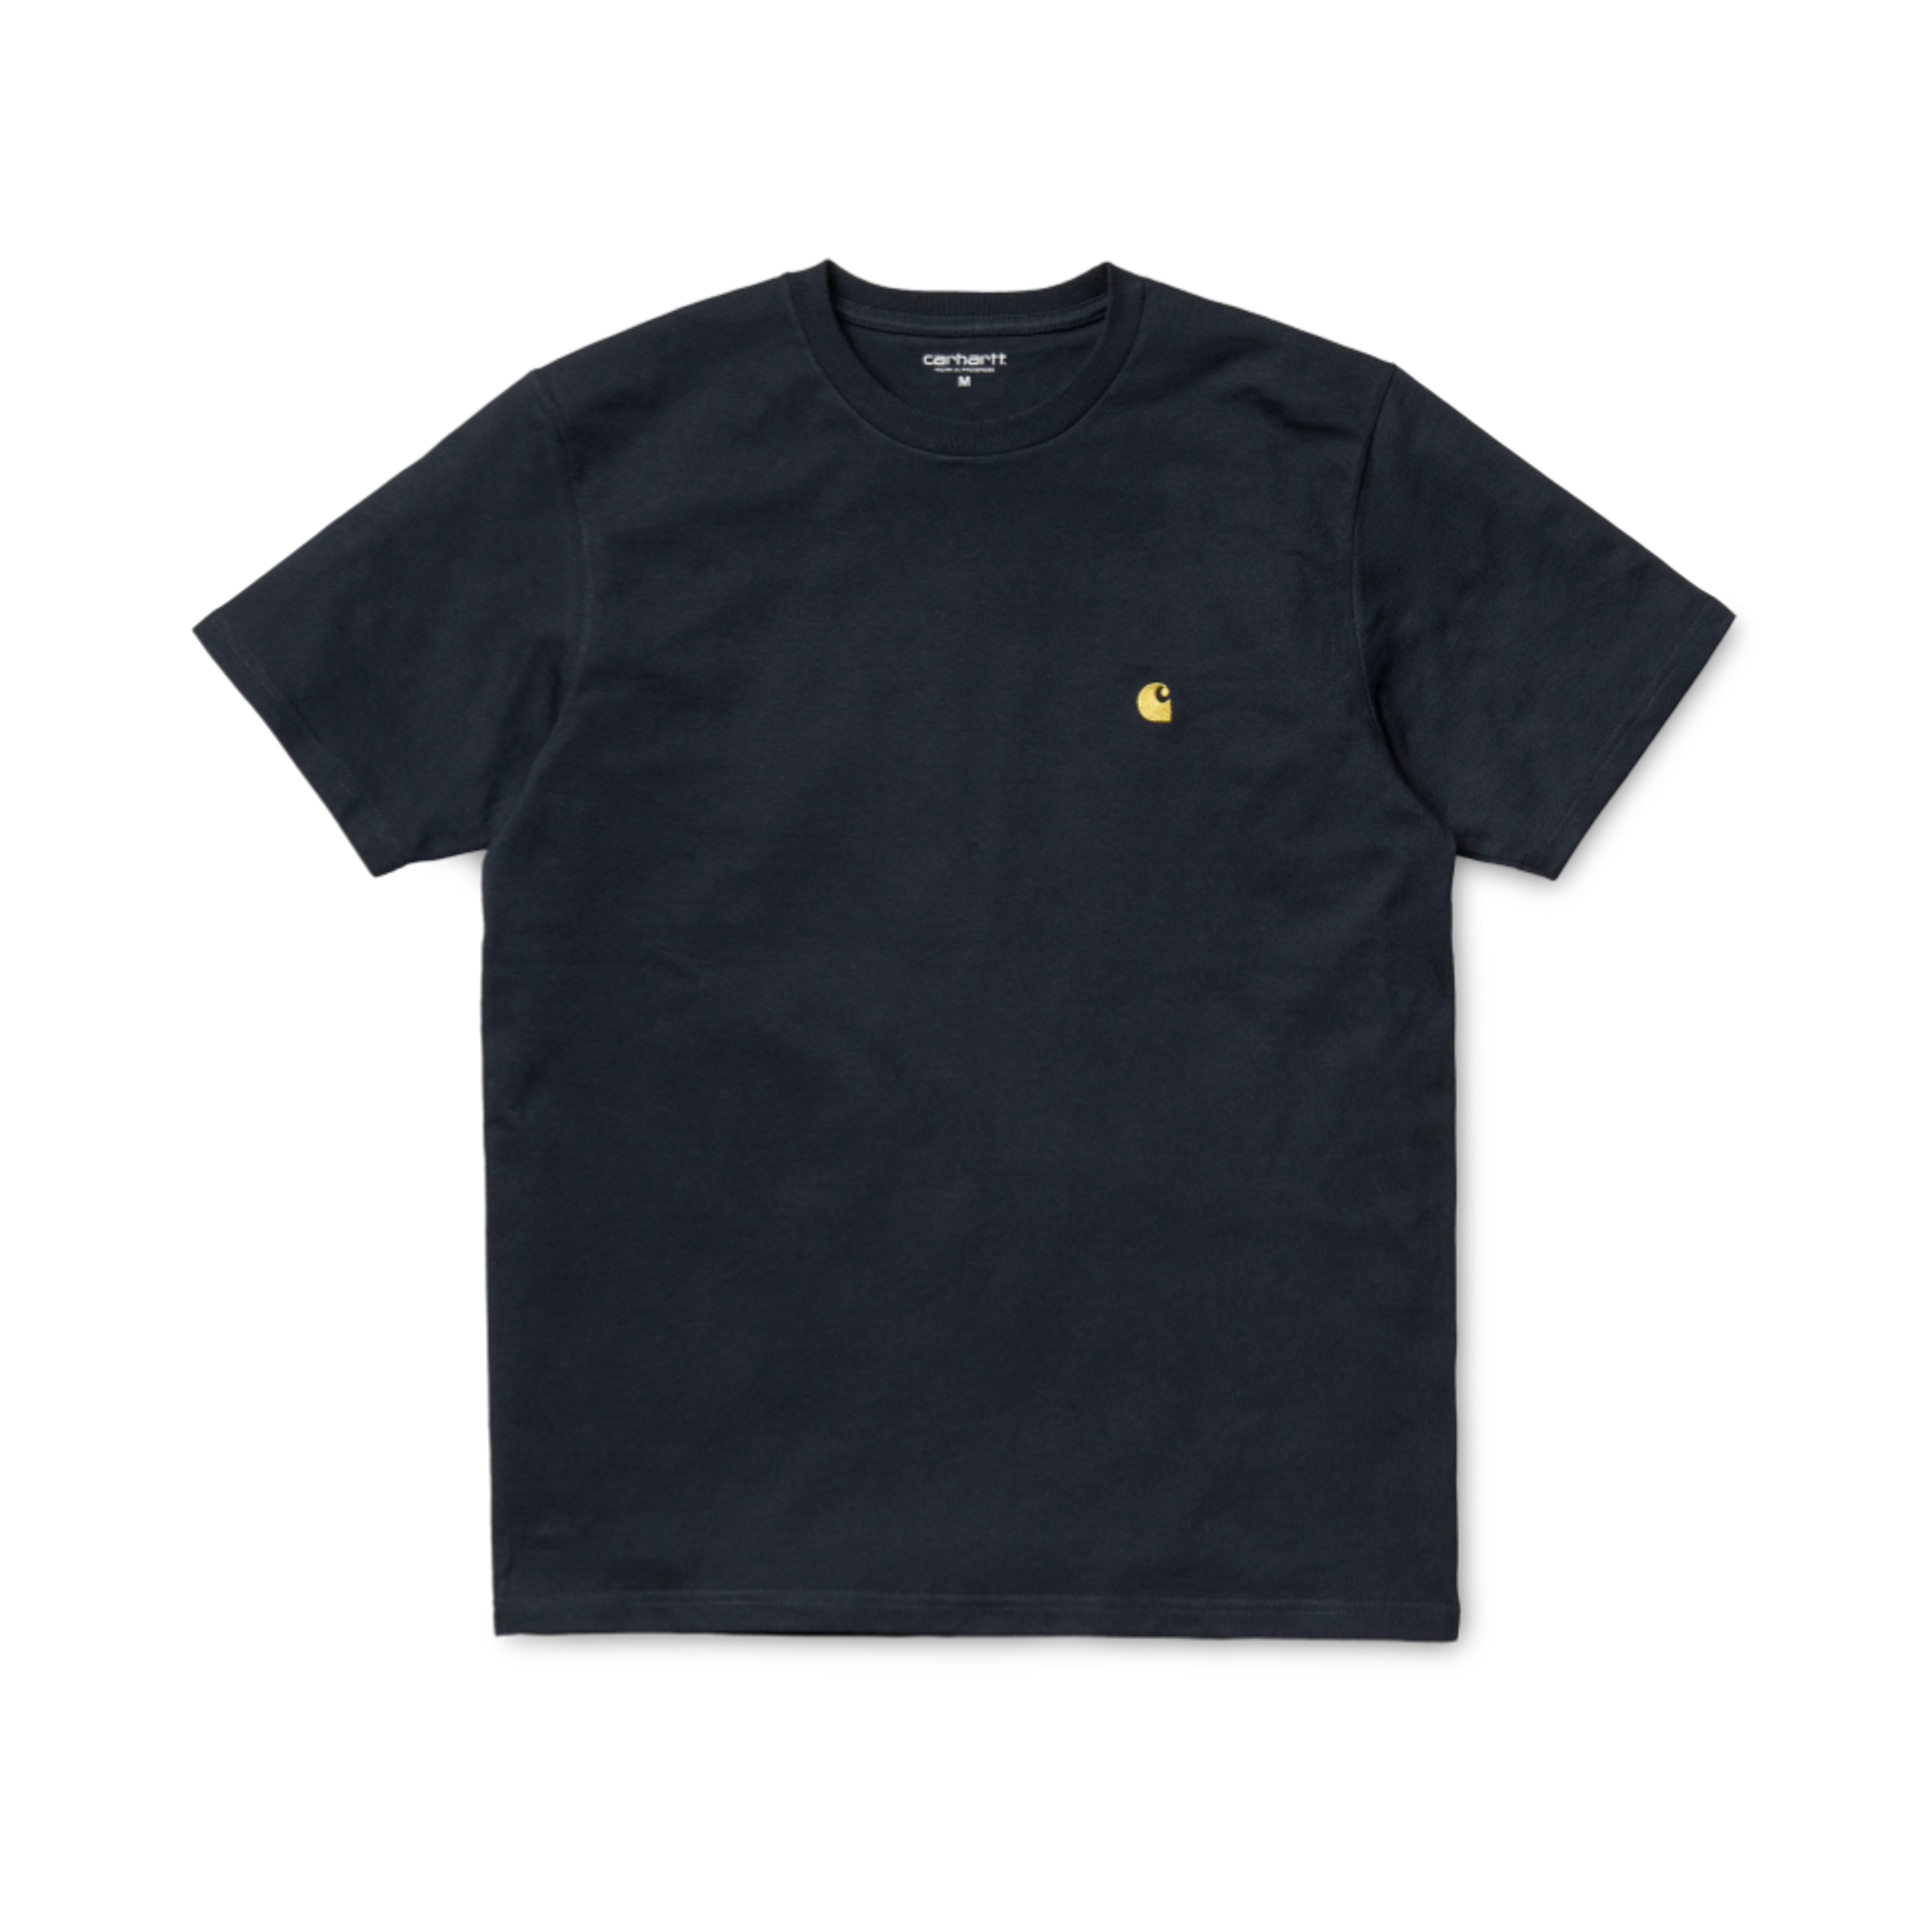 Carhartt WIP Chase S/S Tee 'Black/Gold'